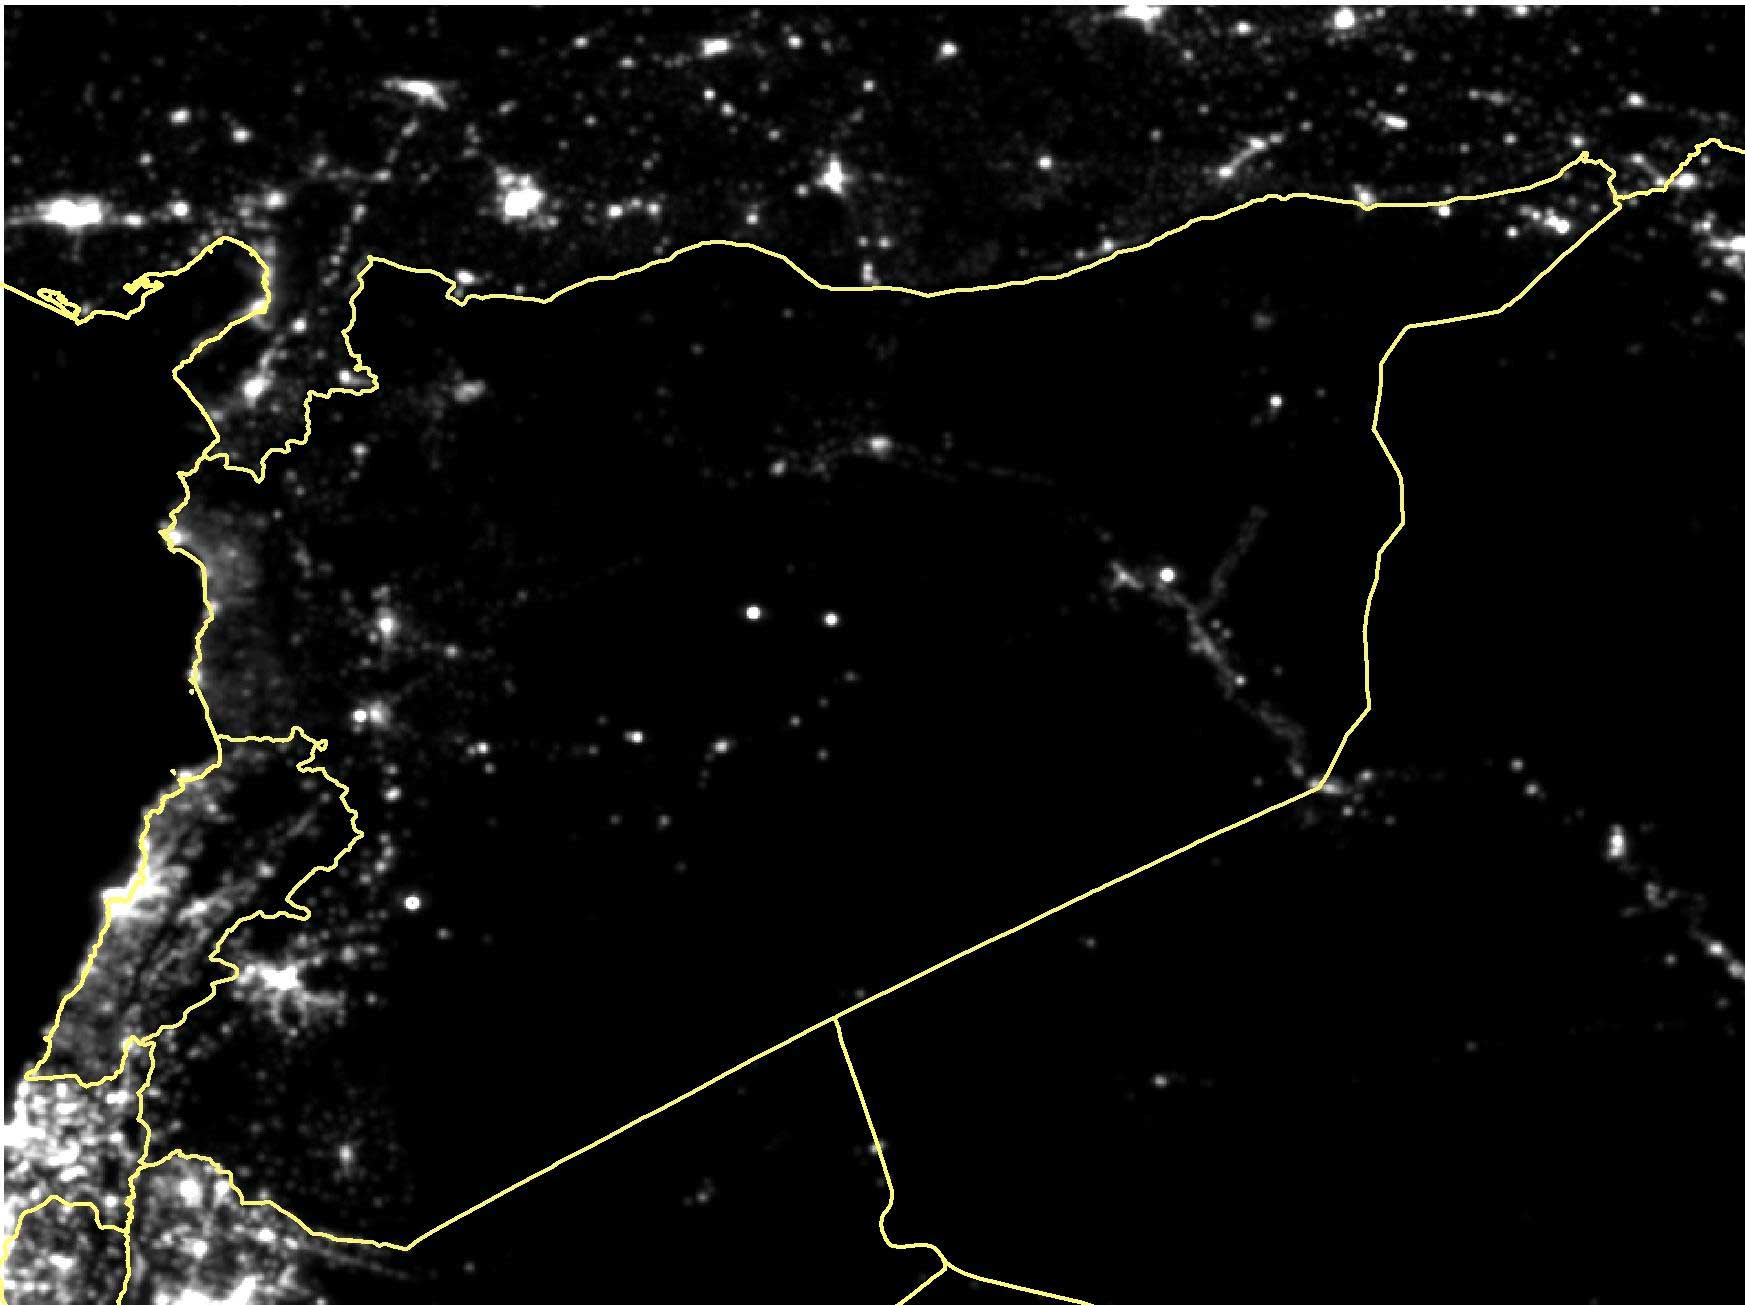 Satellite imagery of Syria in September 2014. (#withSyria)